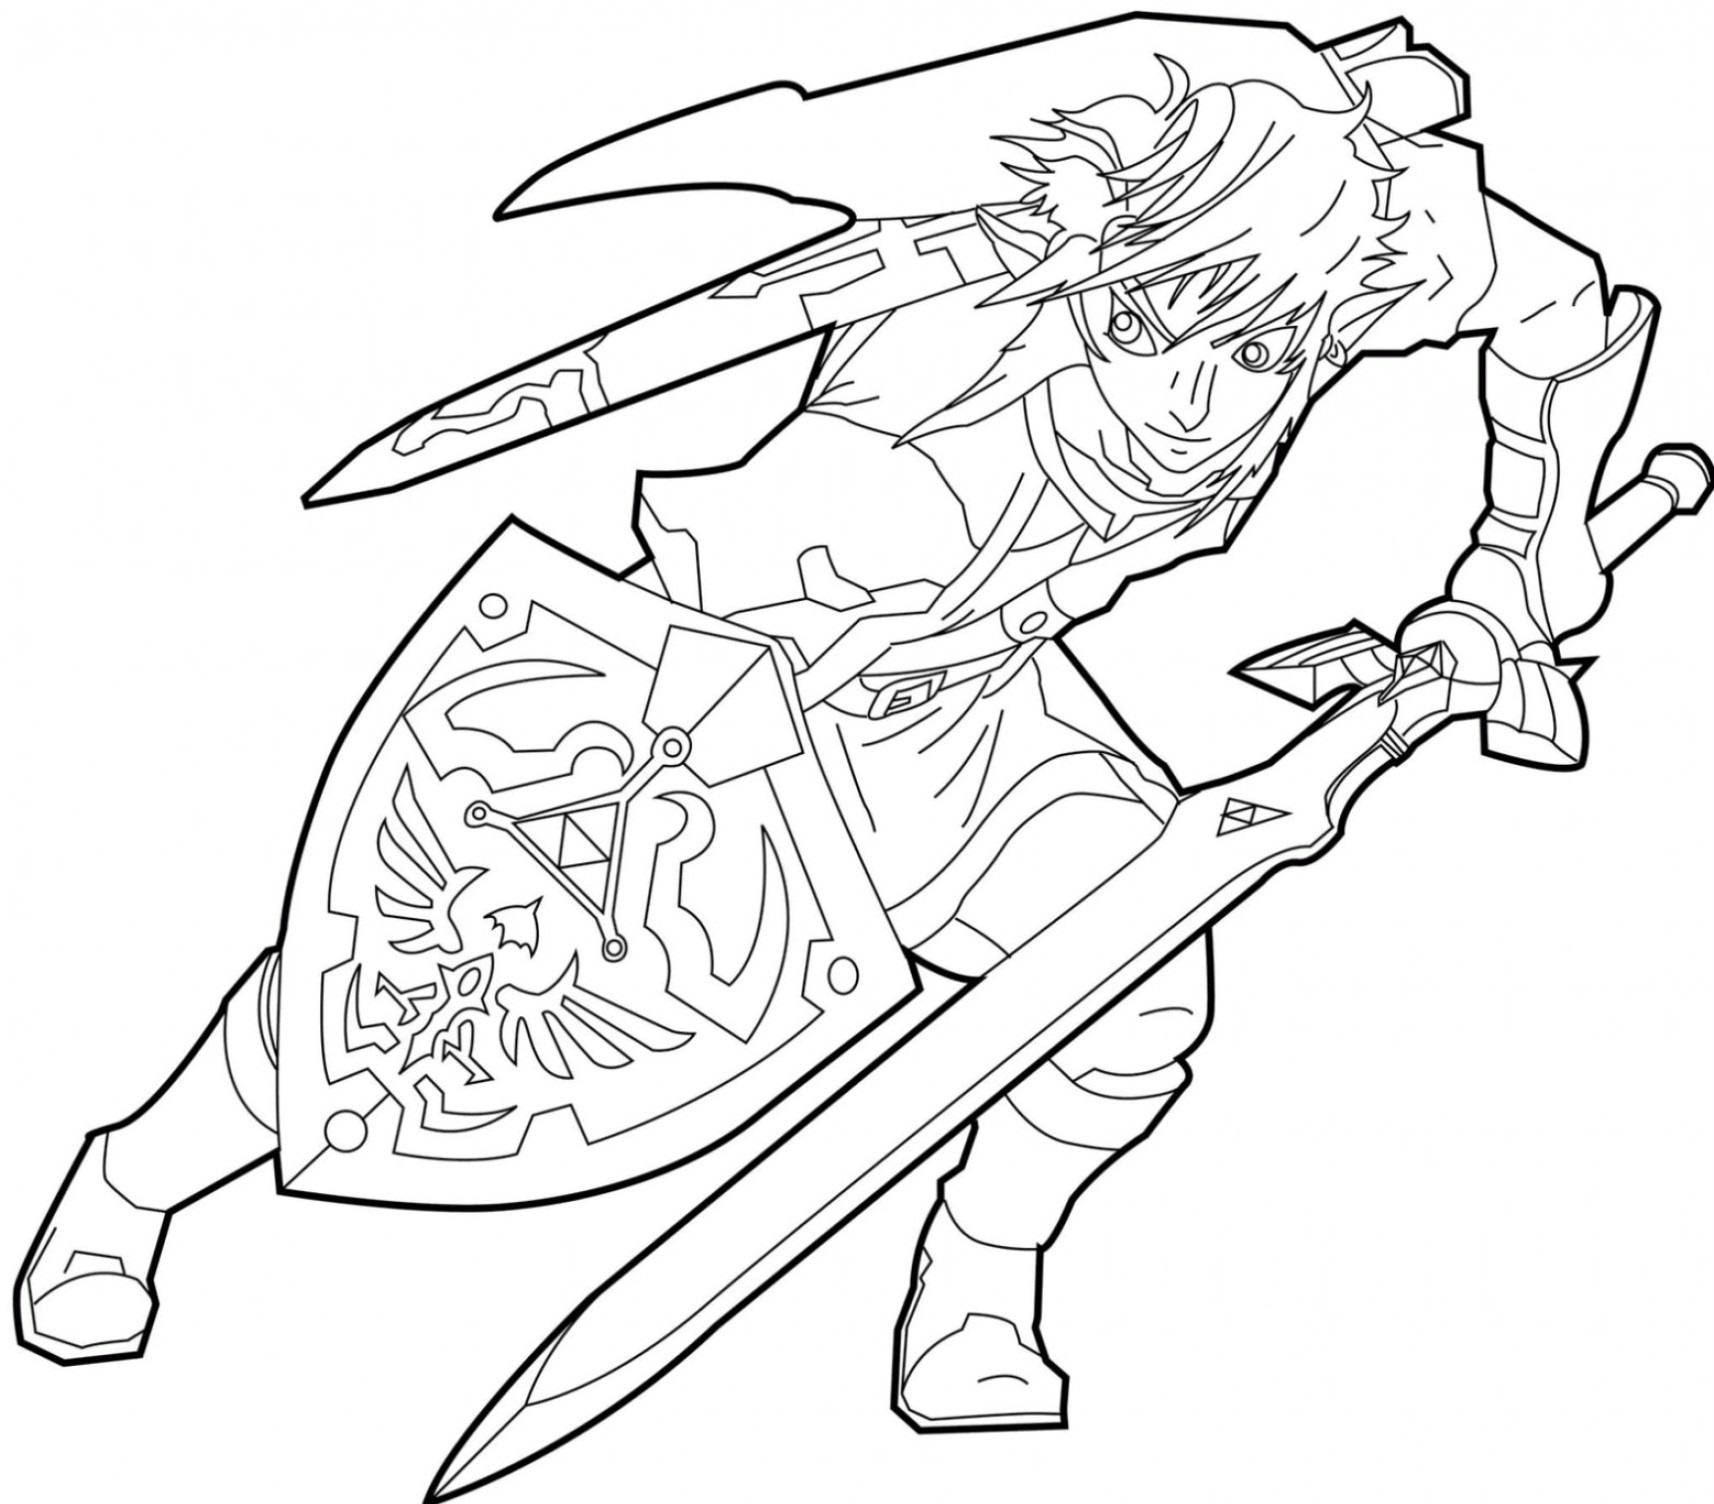 349 Unicorn Legend Of Zelda Coloring Pages with Printable